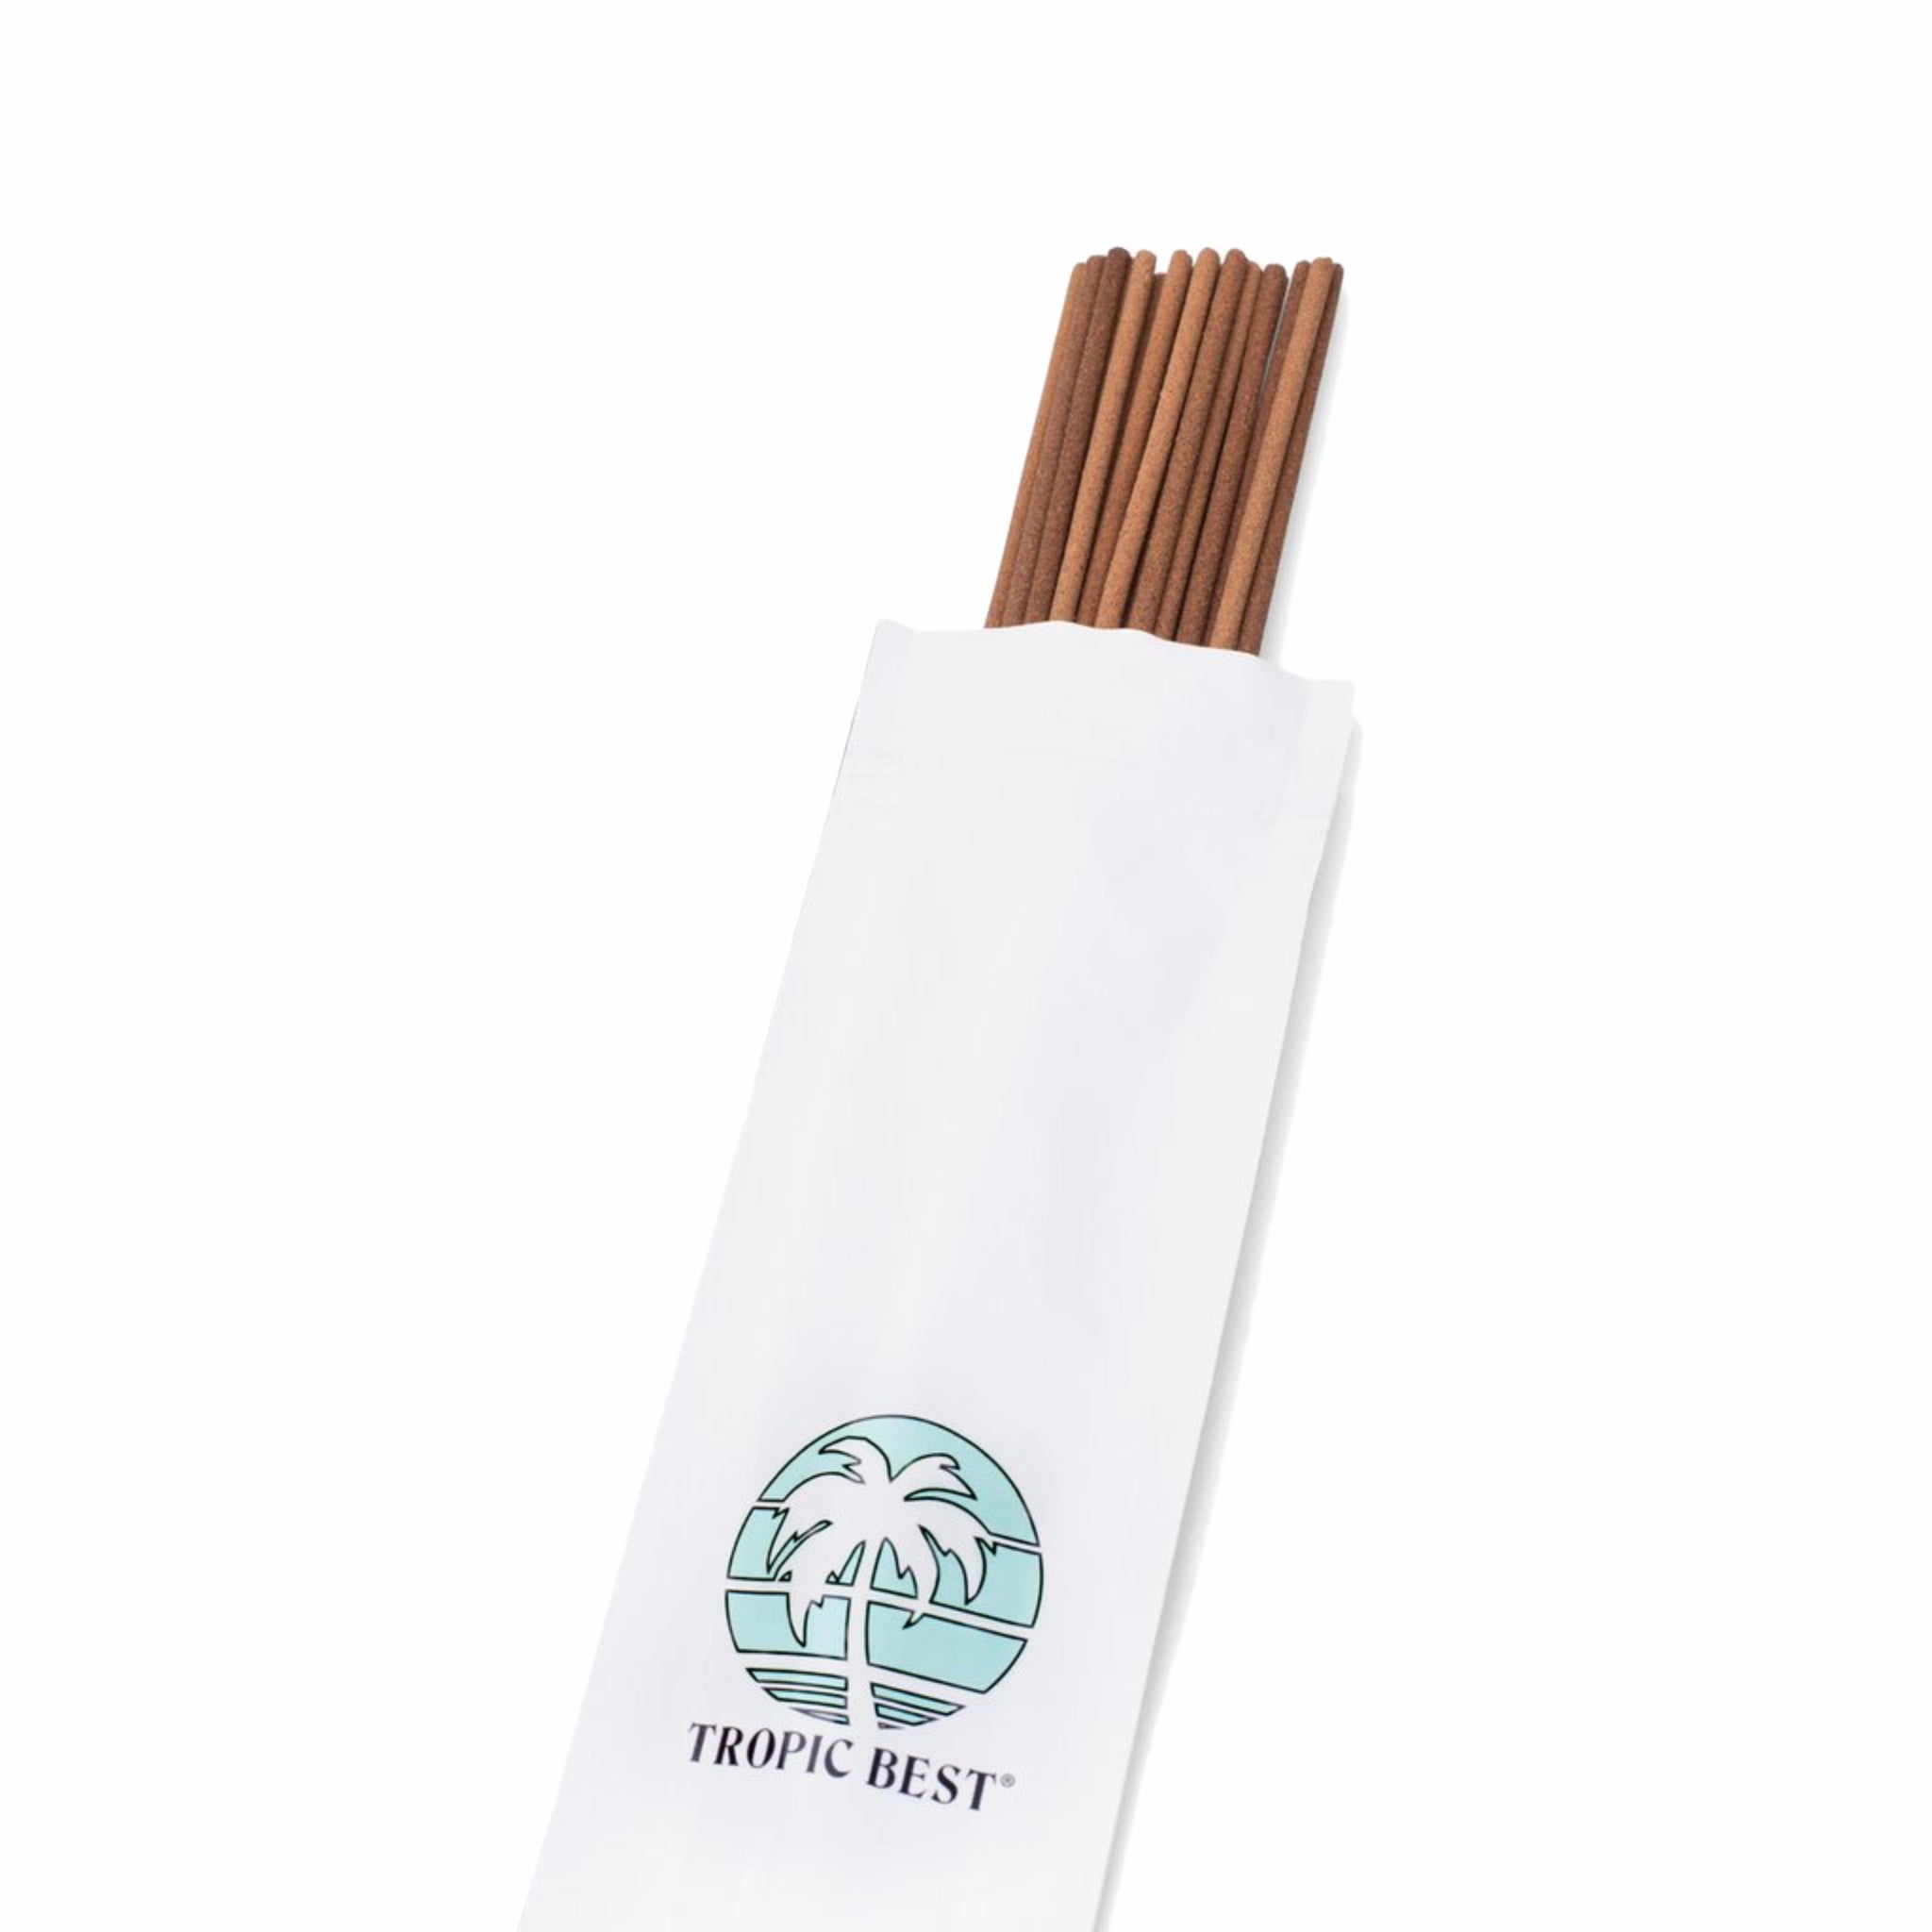 Tropic Best Chocolate Incense - August Shop